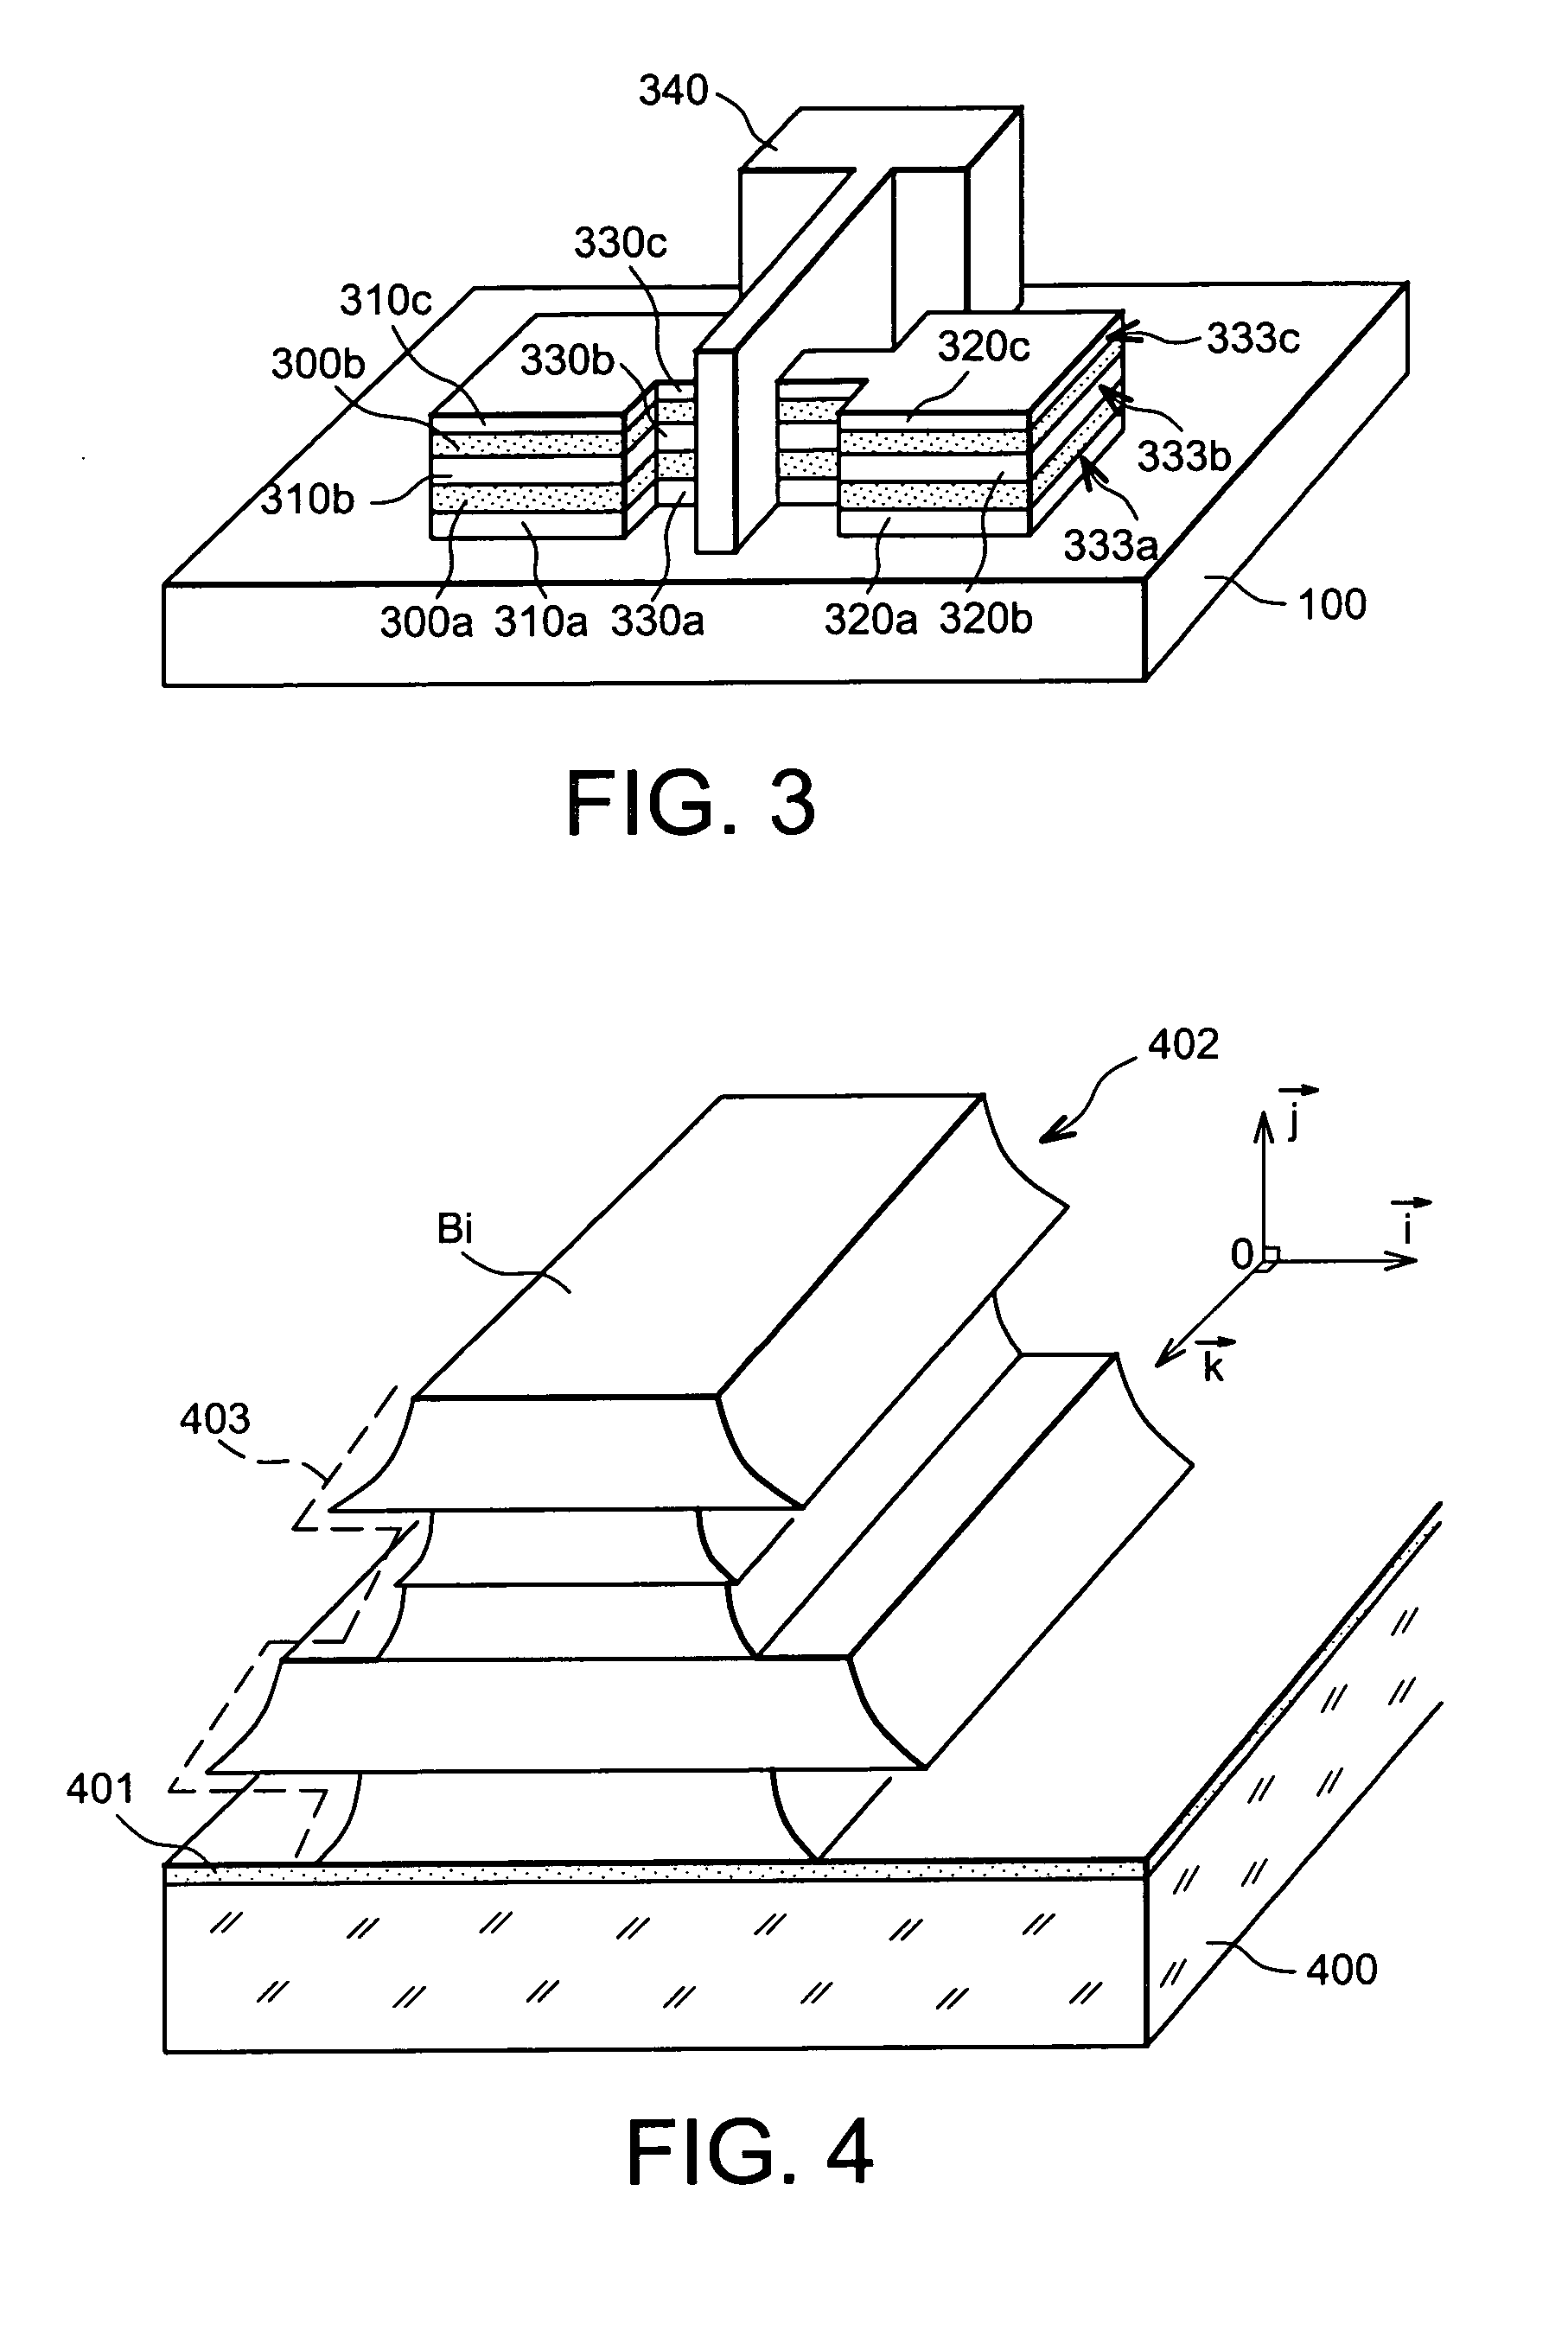 Field-effect microelectronic device, capable of forming one or several transistor channels